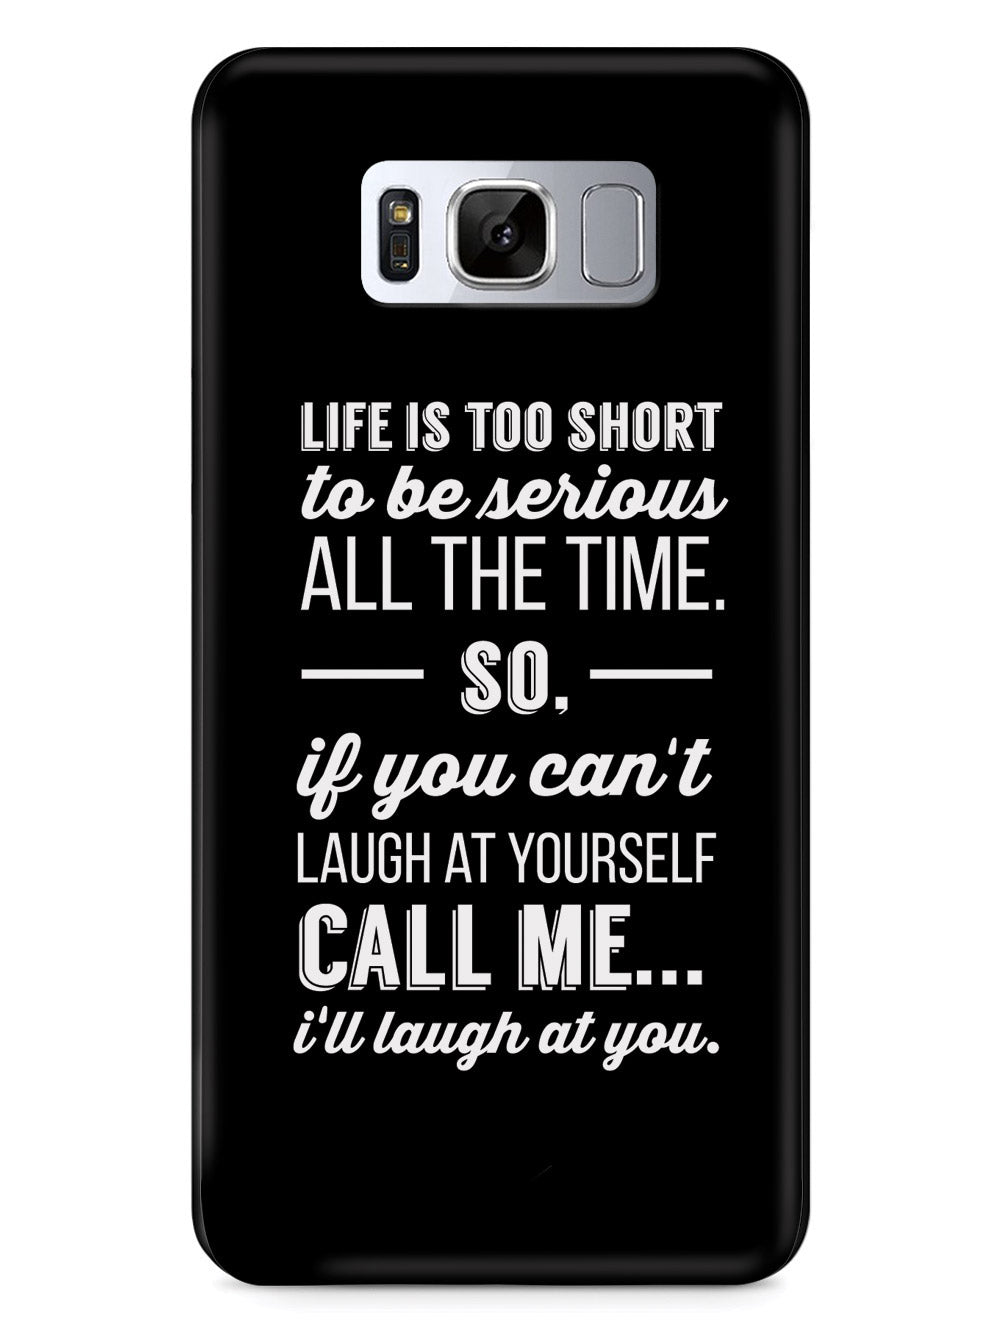 Life is Too Short inspirational quote Case